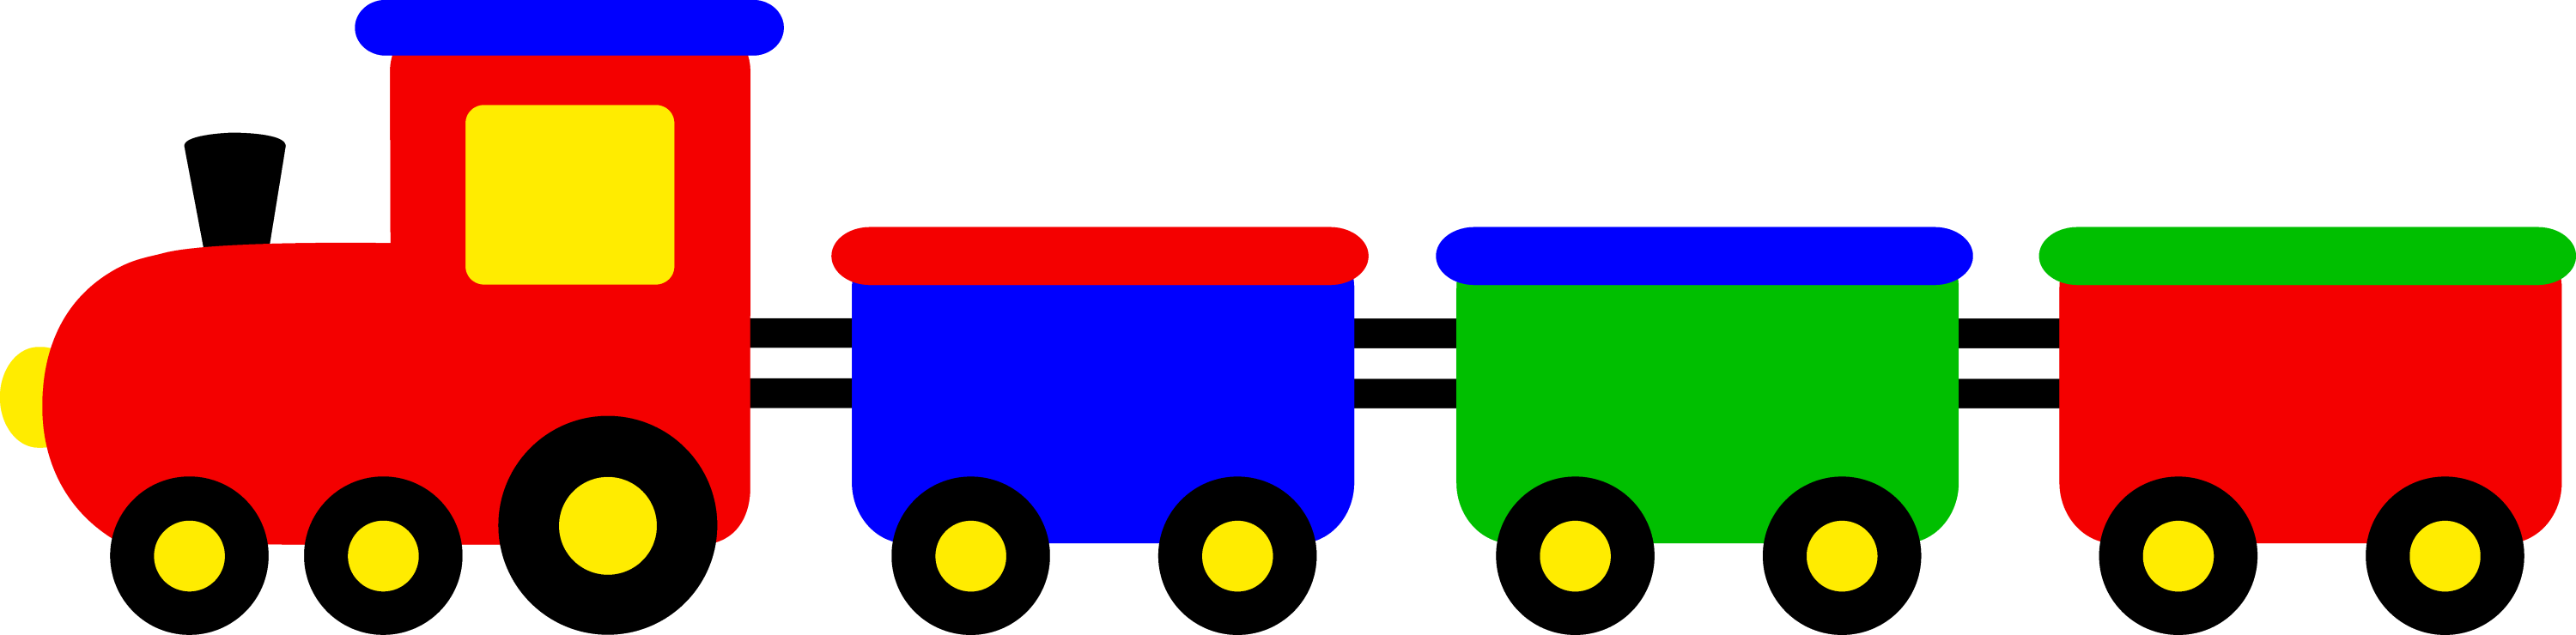 toy train clipart images - photo #13